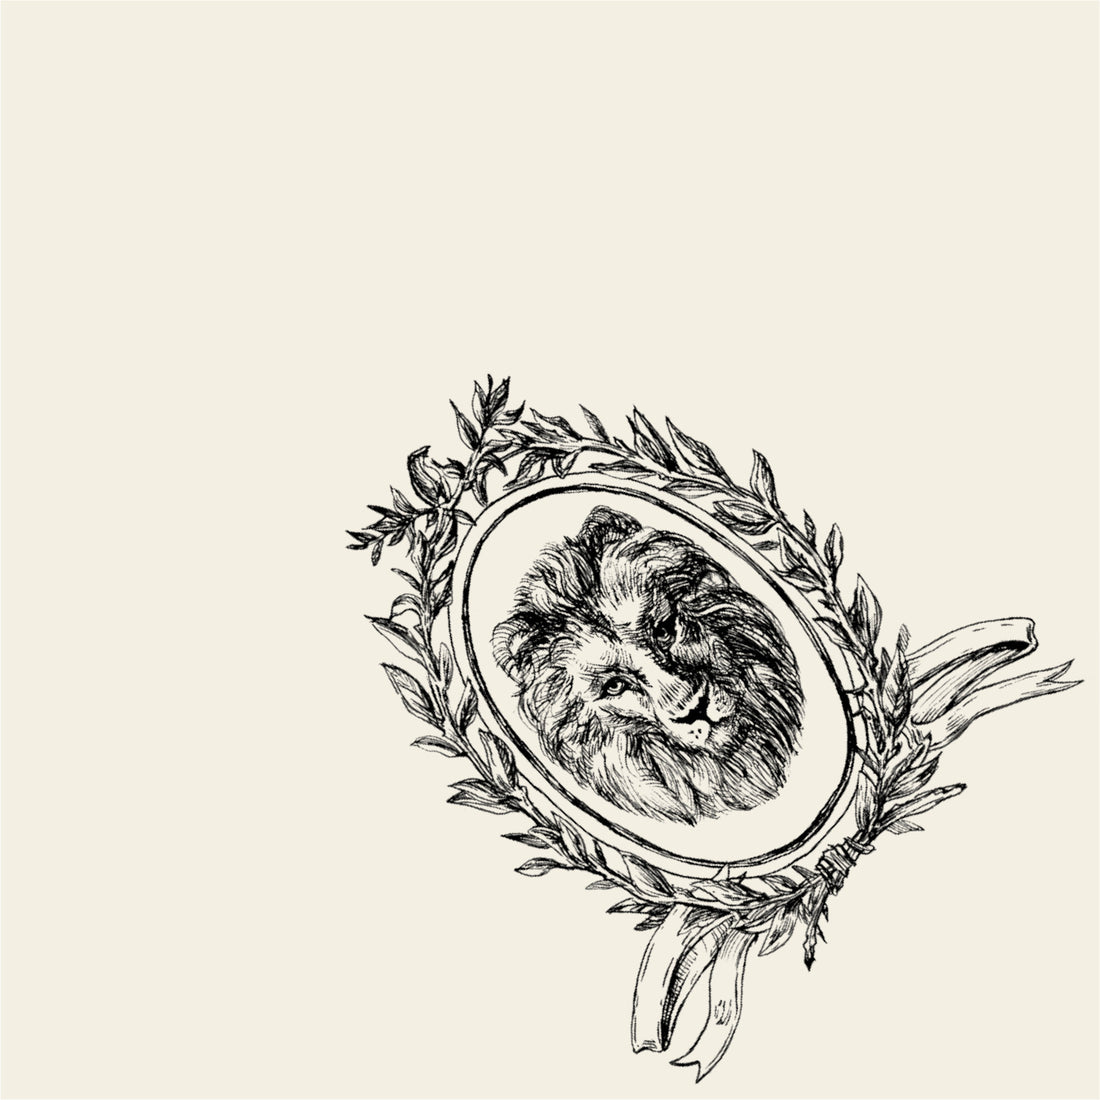 A white, square cocktail napkin featuring black linework of a majestic lion head in an ornate oval frame oriented in the lower right corner.